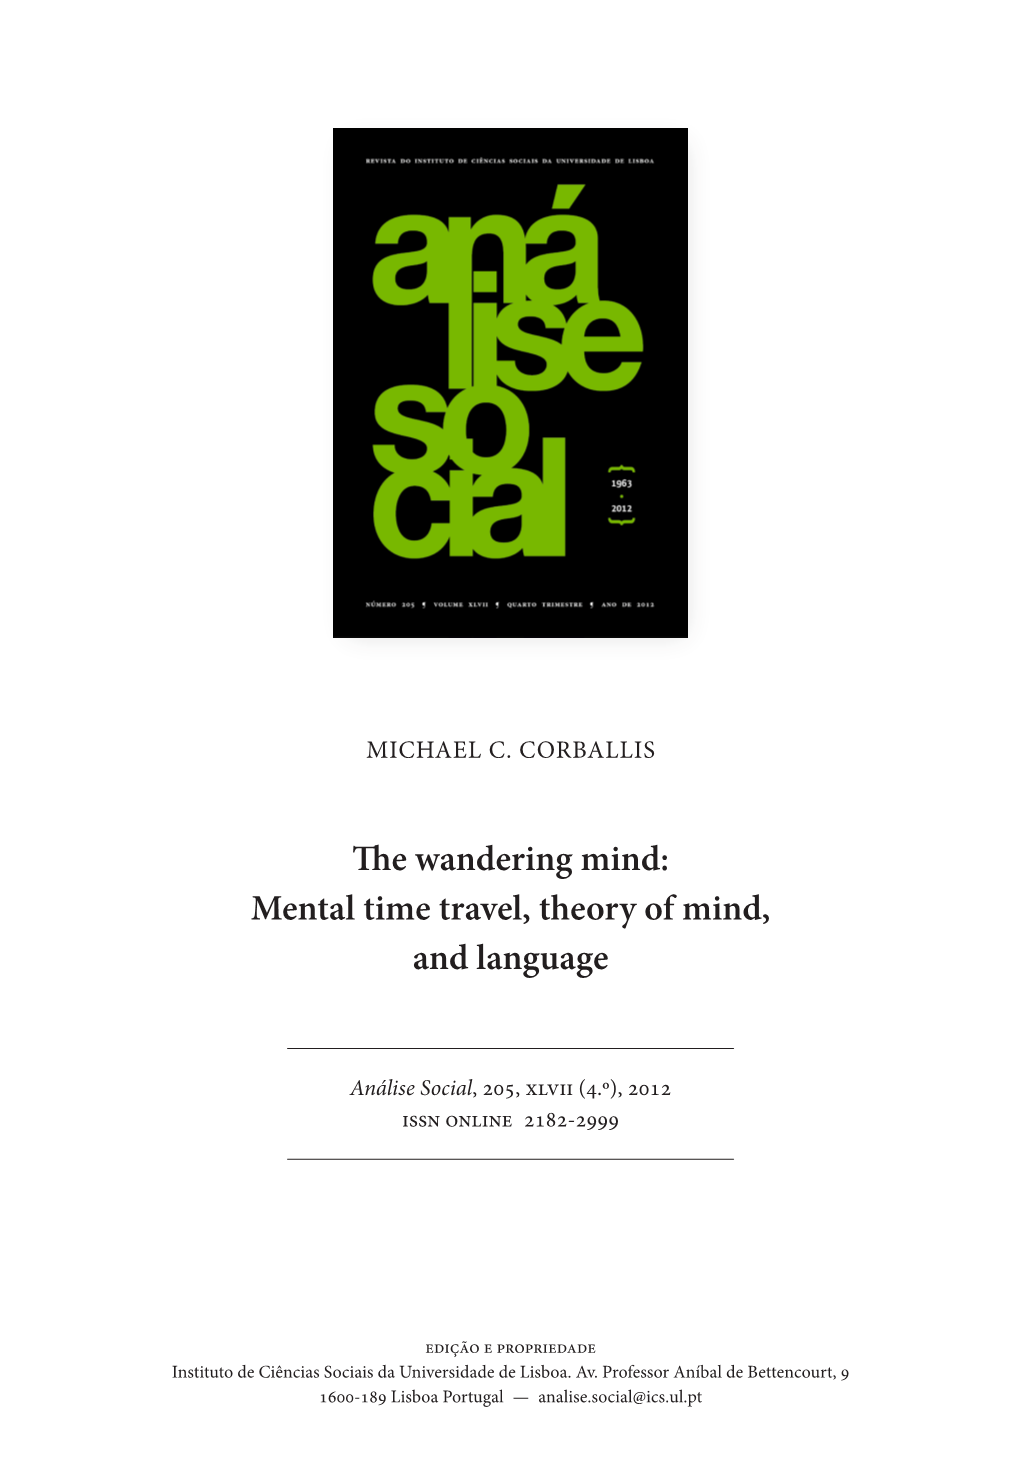 The Wandering Mind: Mental Time Travel, Theory of Mind, and Language